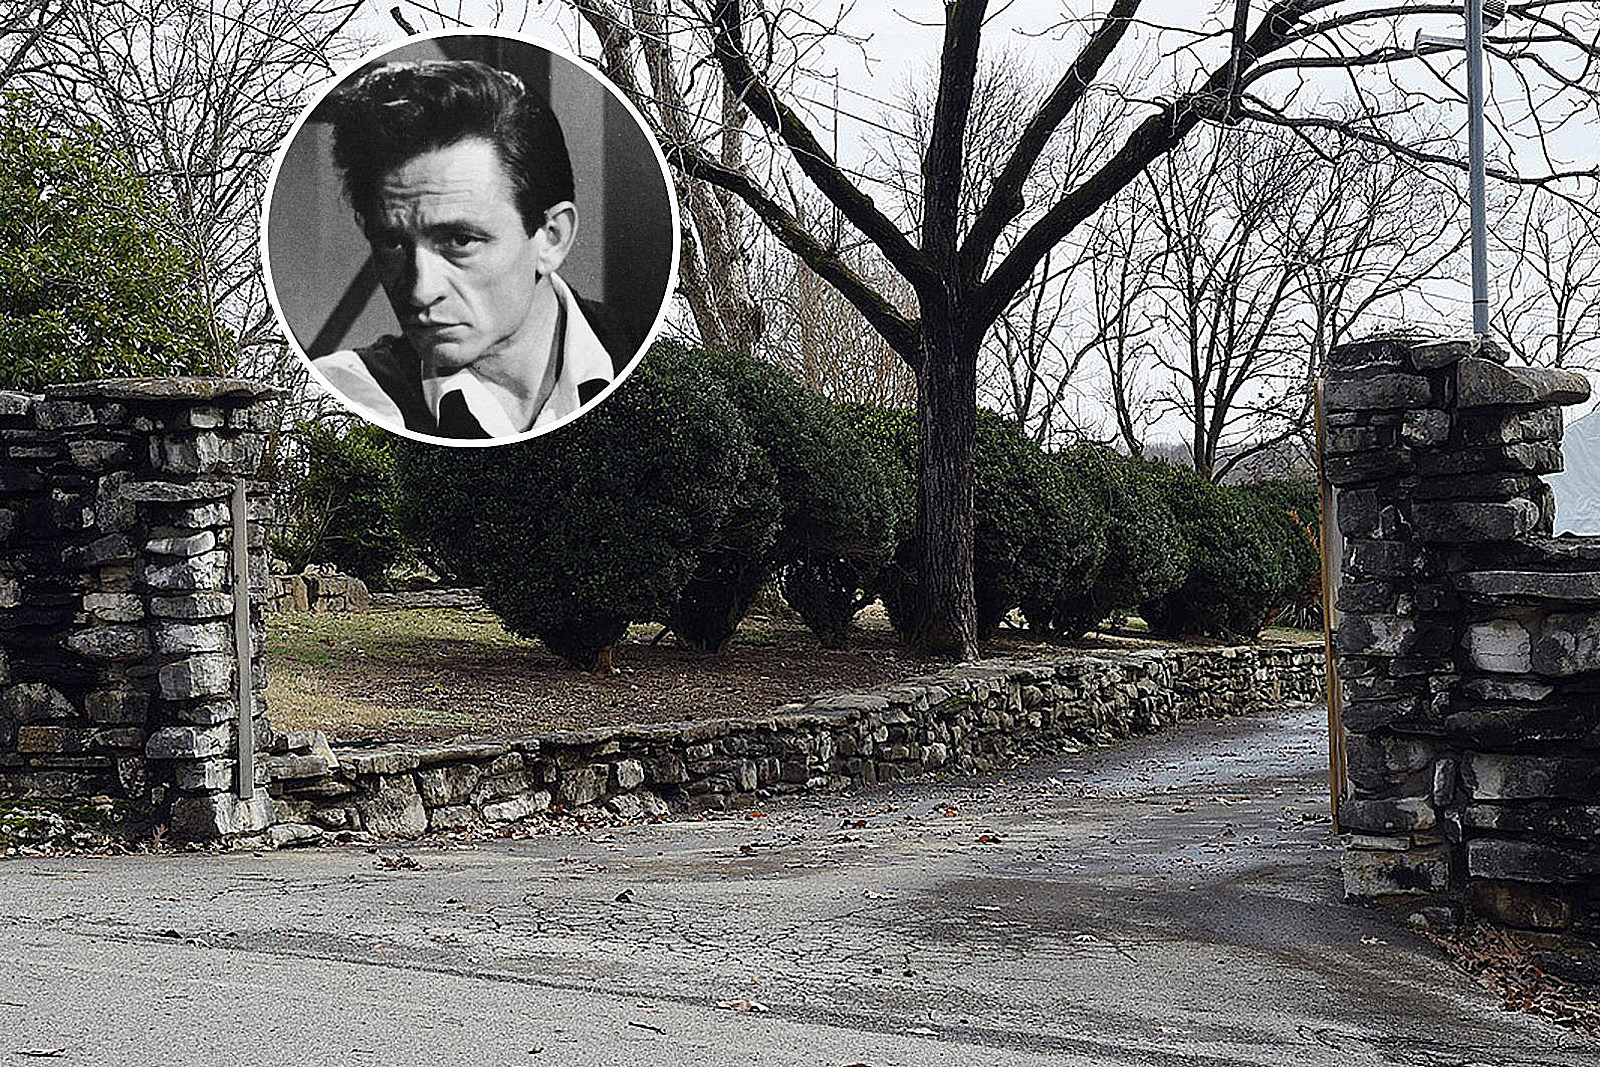 Remember When Johnny Cash's Iconic Estate Went Up for Sale?